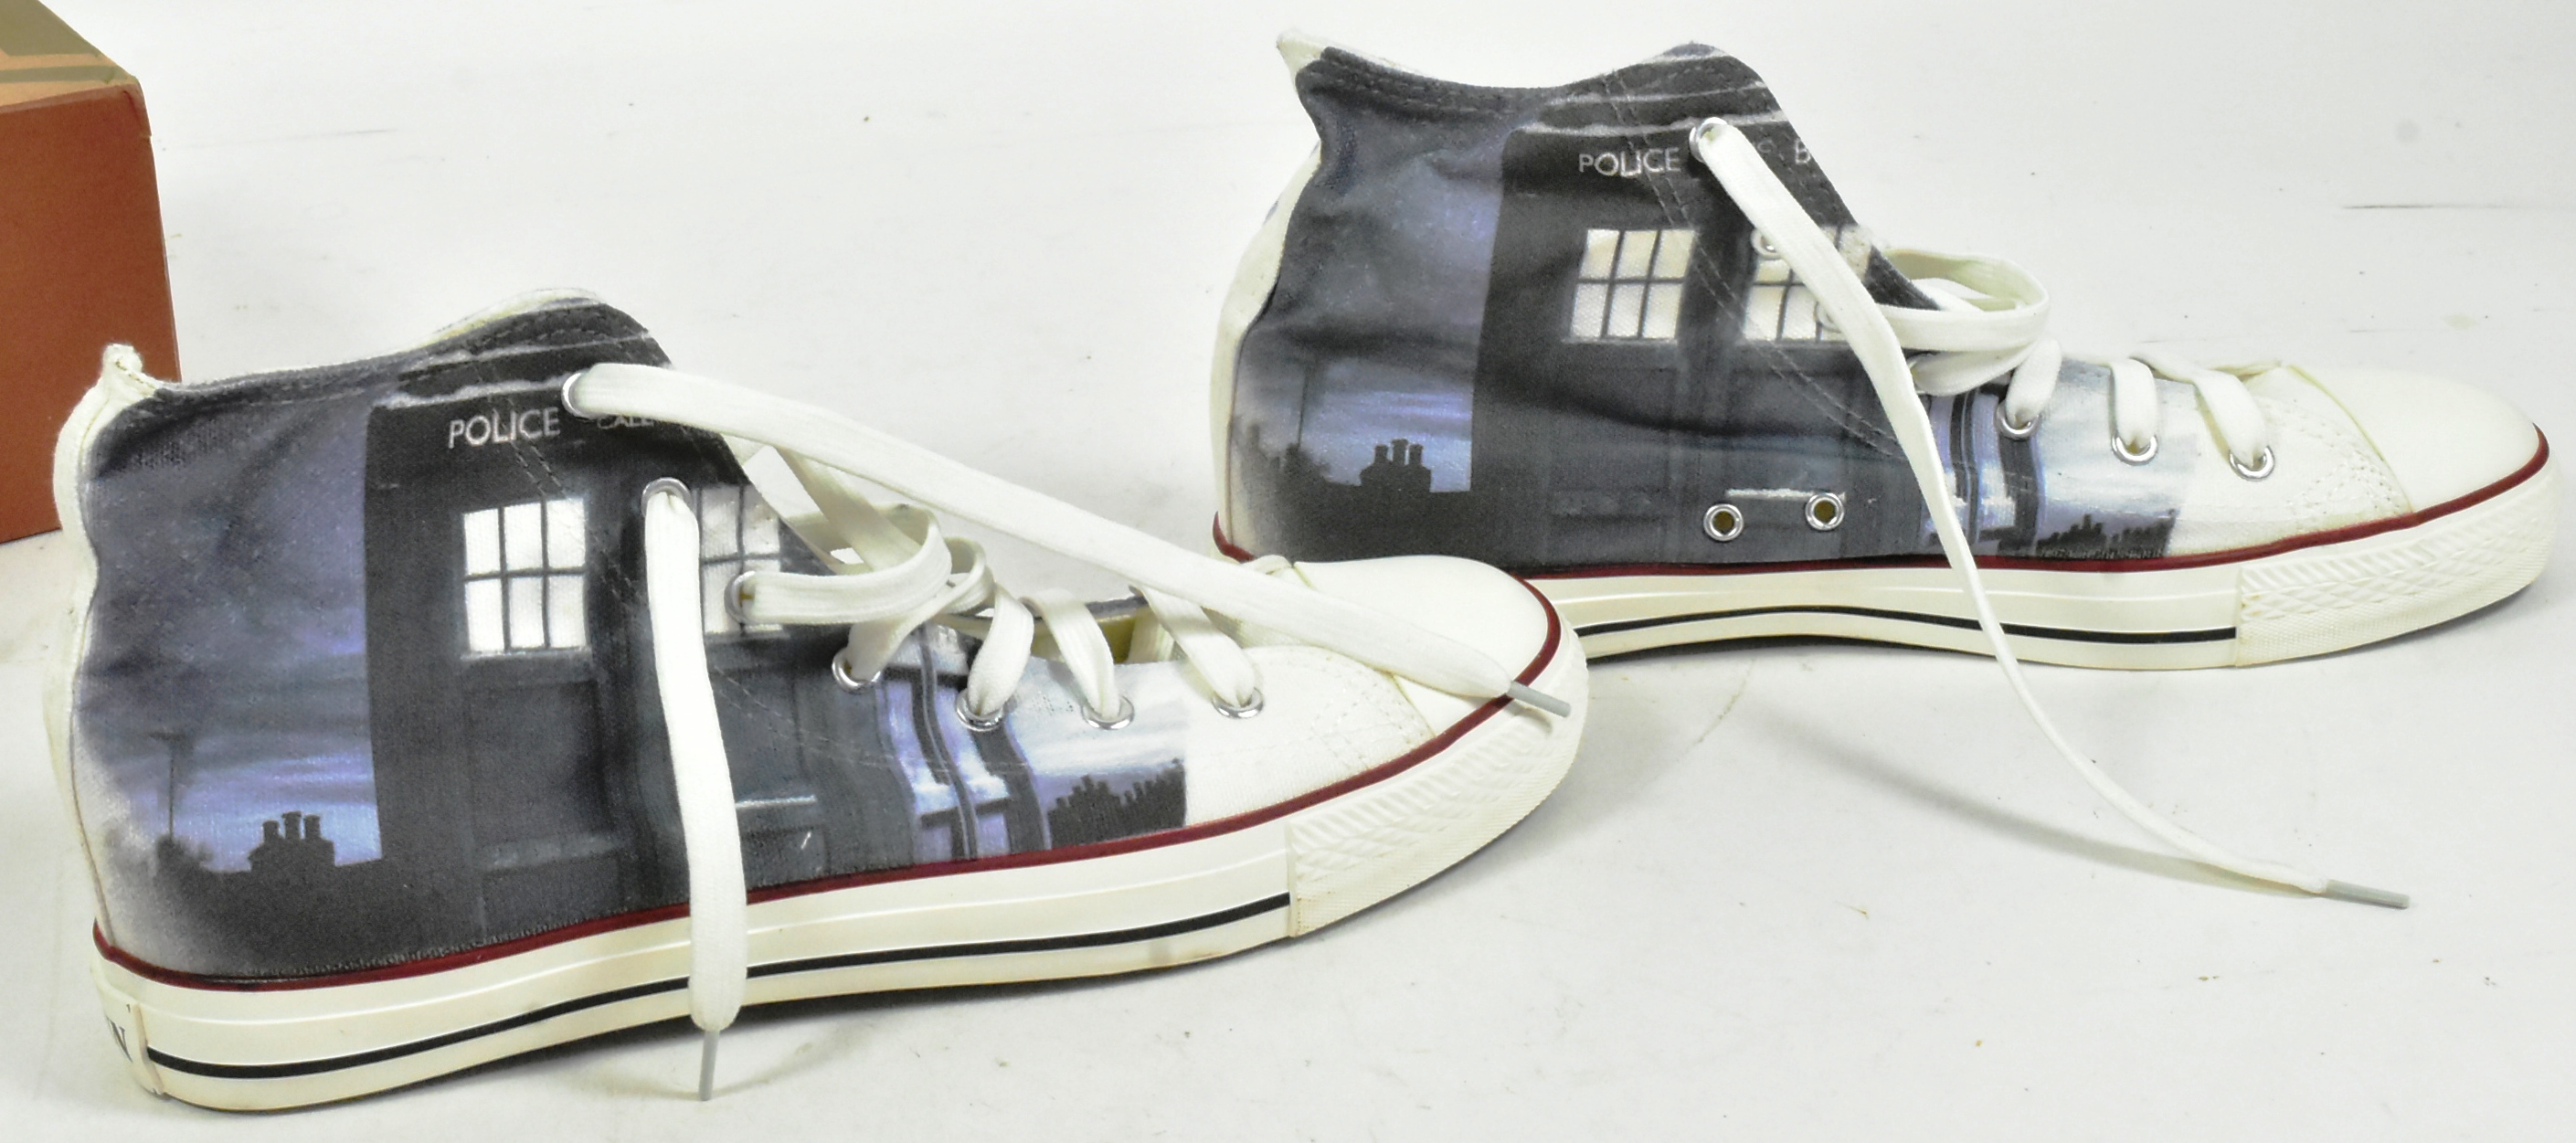 DOCTOR WHO DESUN CONVERSE STYLE HIGH TOP TRAINERS - Image 3 of 6